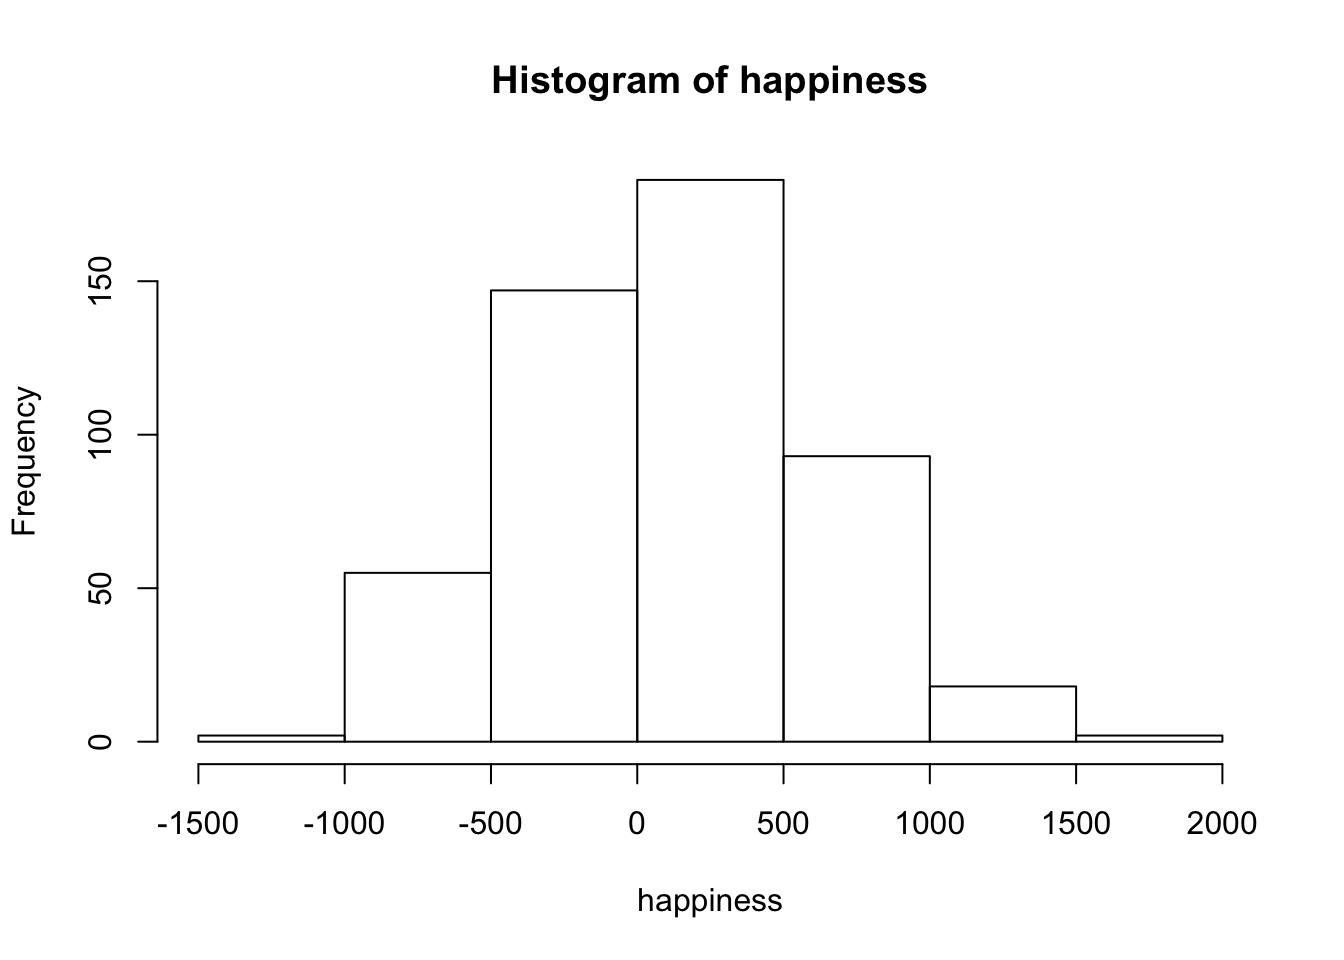 A histogram of the happiness ratings